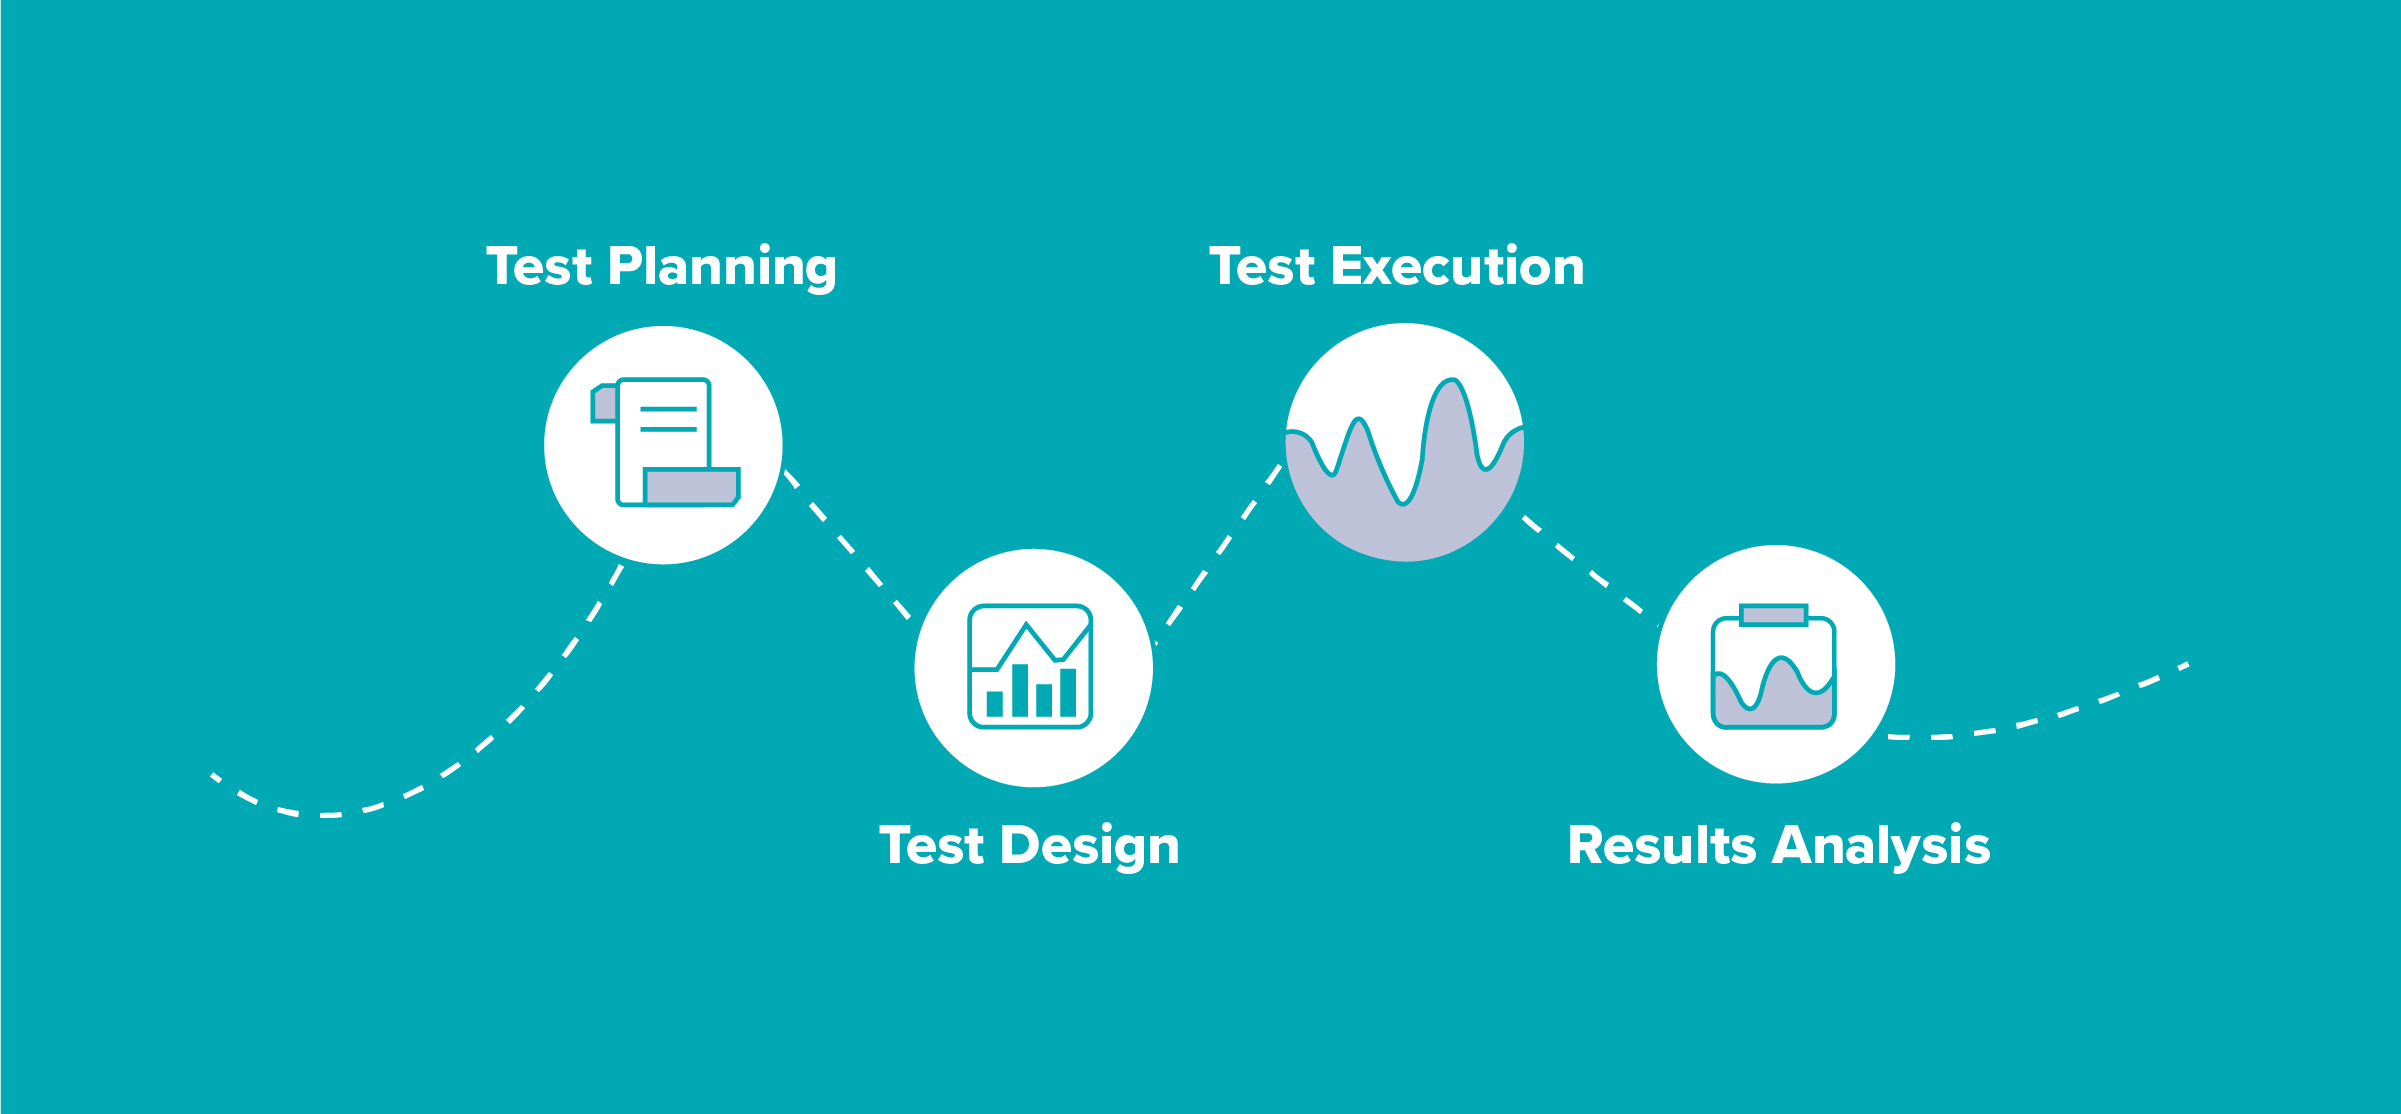 End-to-End Test Lifecycle